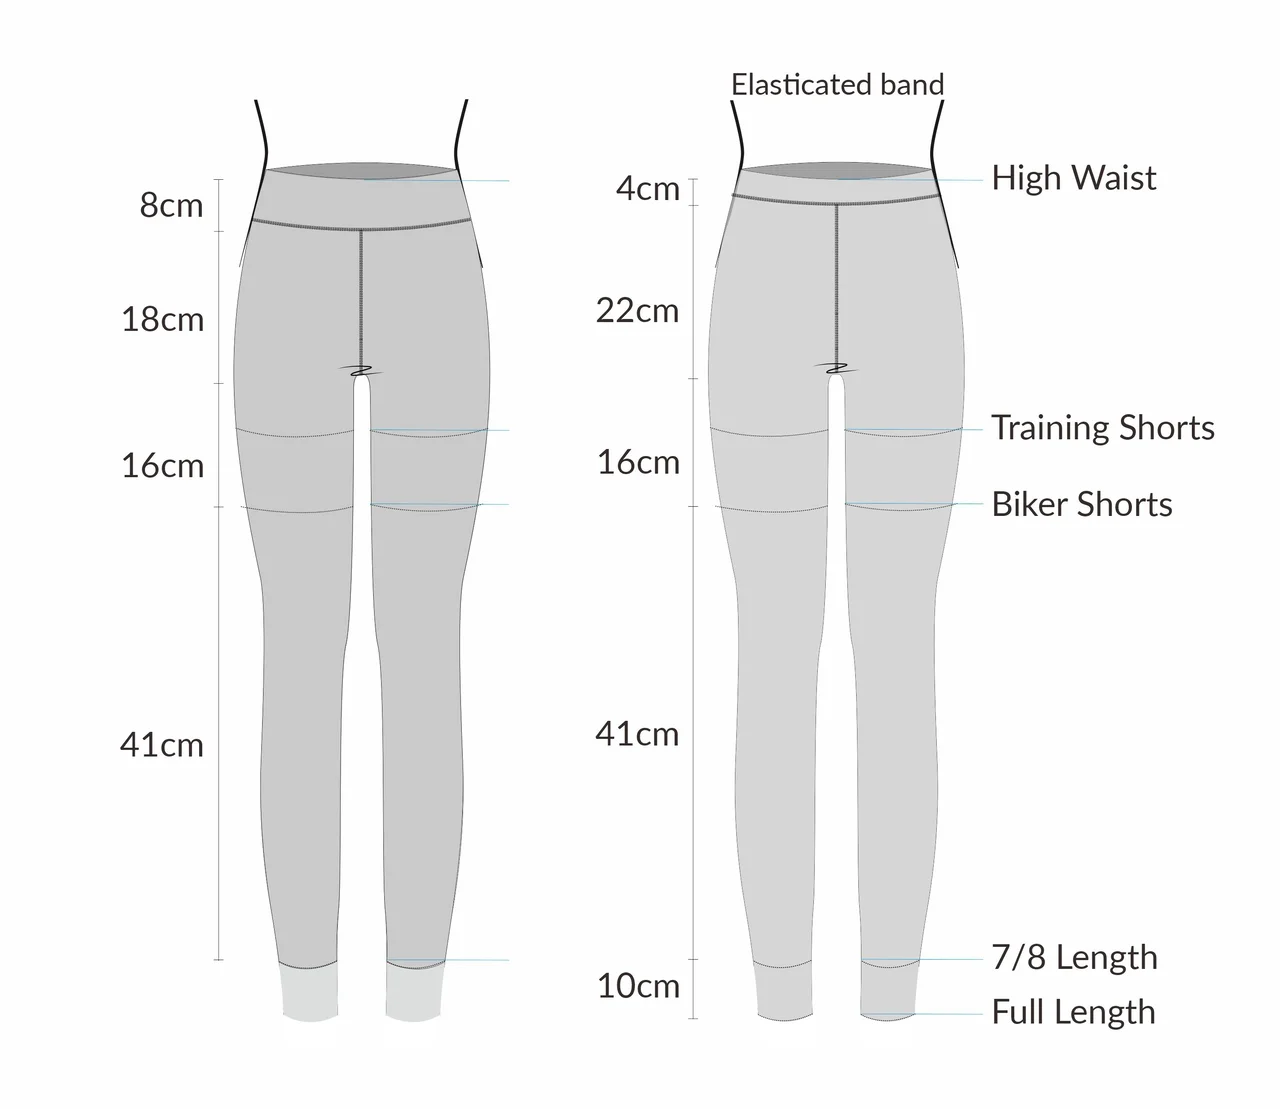 BODY SIZE GUIDE KINGTRADING 2